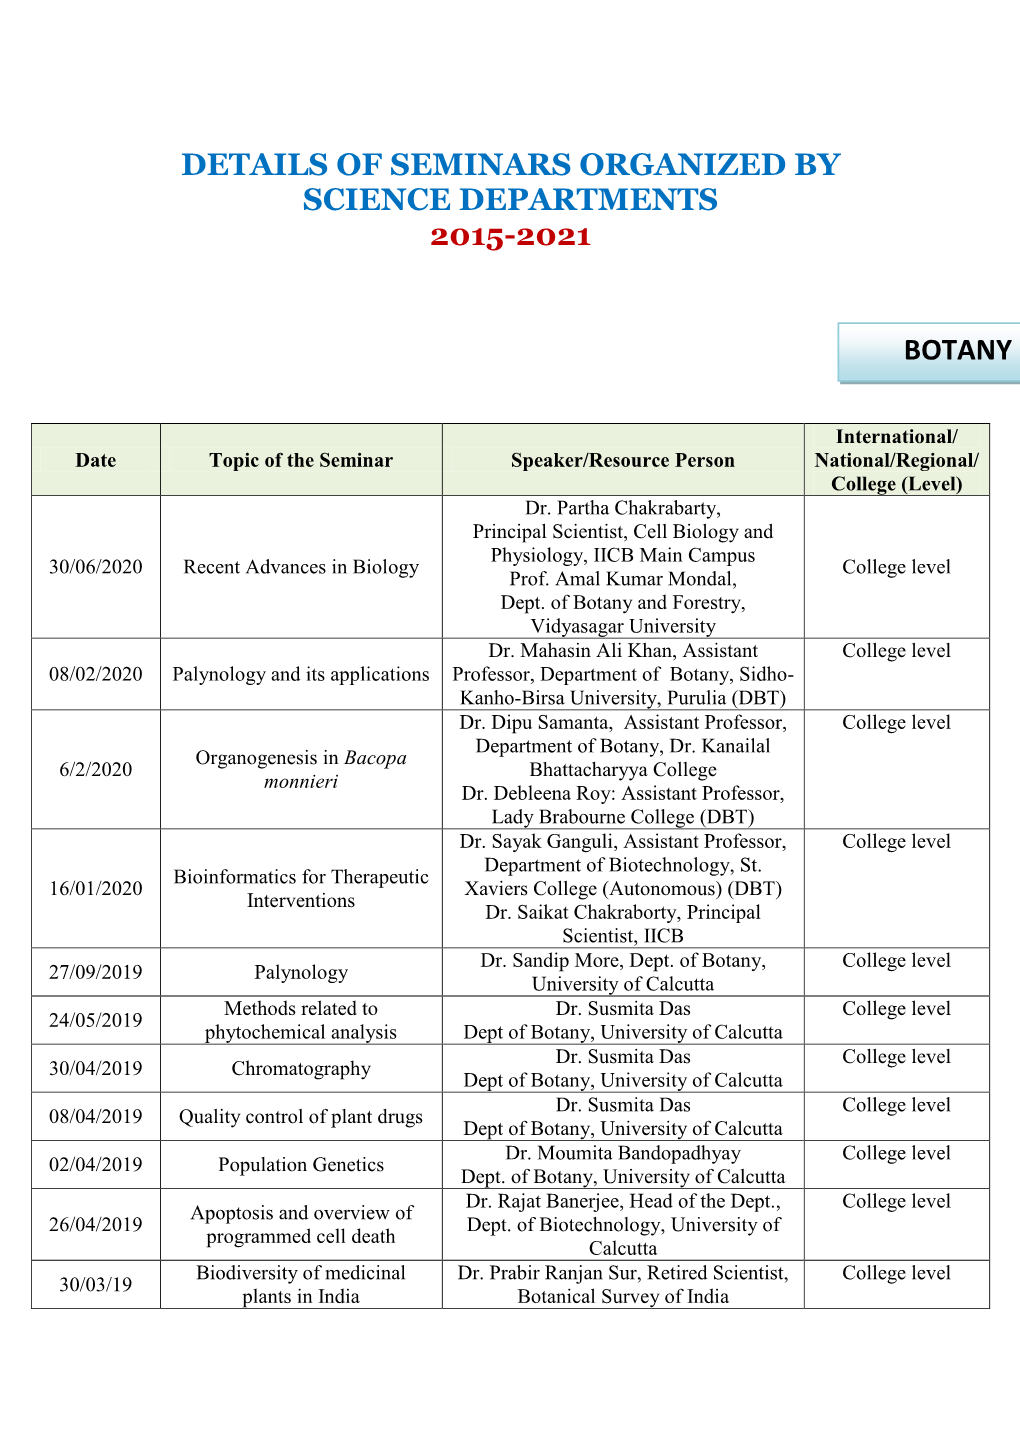 Details of Seminars Organized by Science Departments 2015-2021